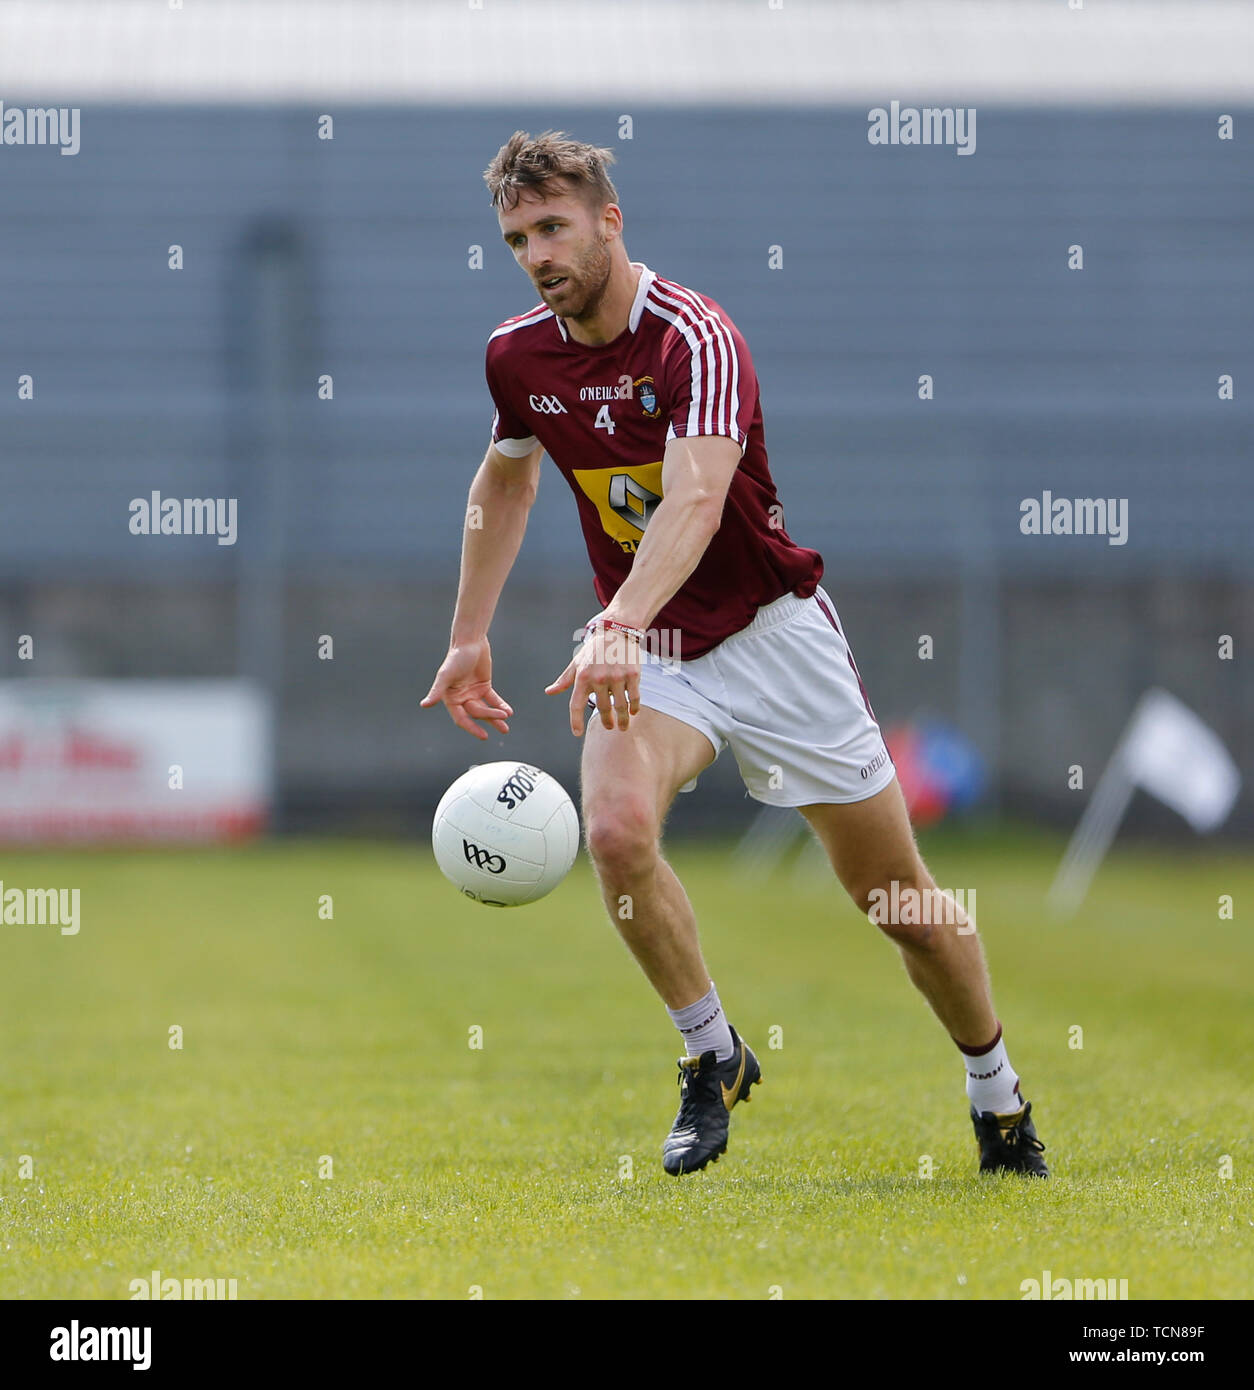 Mullingar, Co Westmeath, Ireland. 9th June 2019. Mullingar, Co Westmeath, Ireland. 9th June 2019, TEG Cusack Park, Mullingar, Co Westmeath, Ireland; GAA All Ireland Senior Football Championship Qualifier, Round 1, Westmeath versus Waterford; Kevin Maguire brings the ball forward for Westmeath Credit: Action Plus Sports Images/Alamy Live News Stock Photo